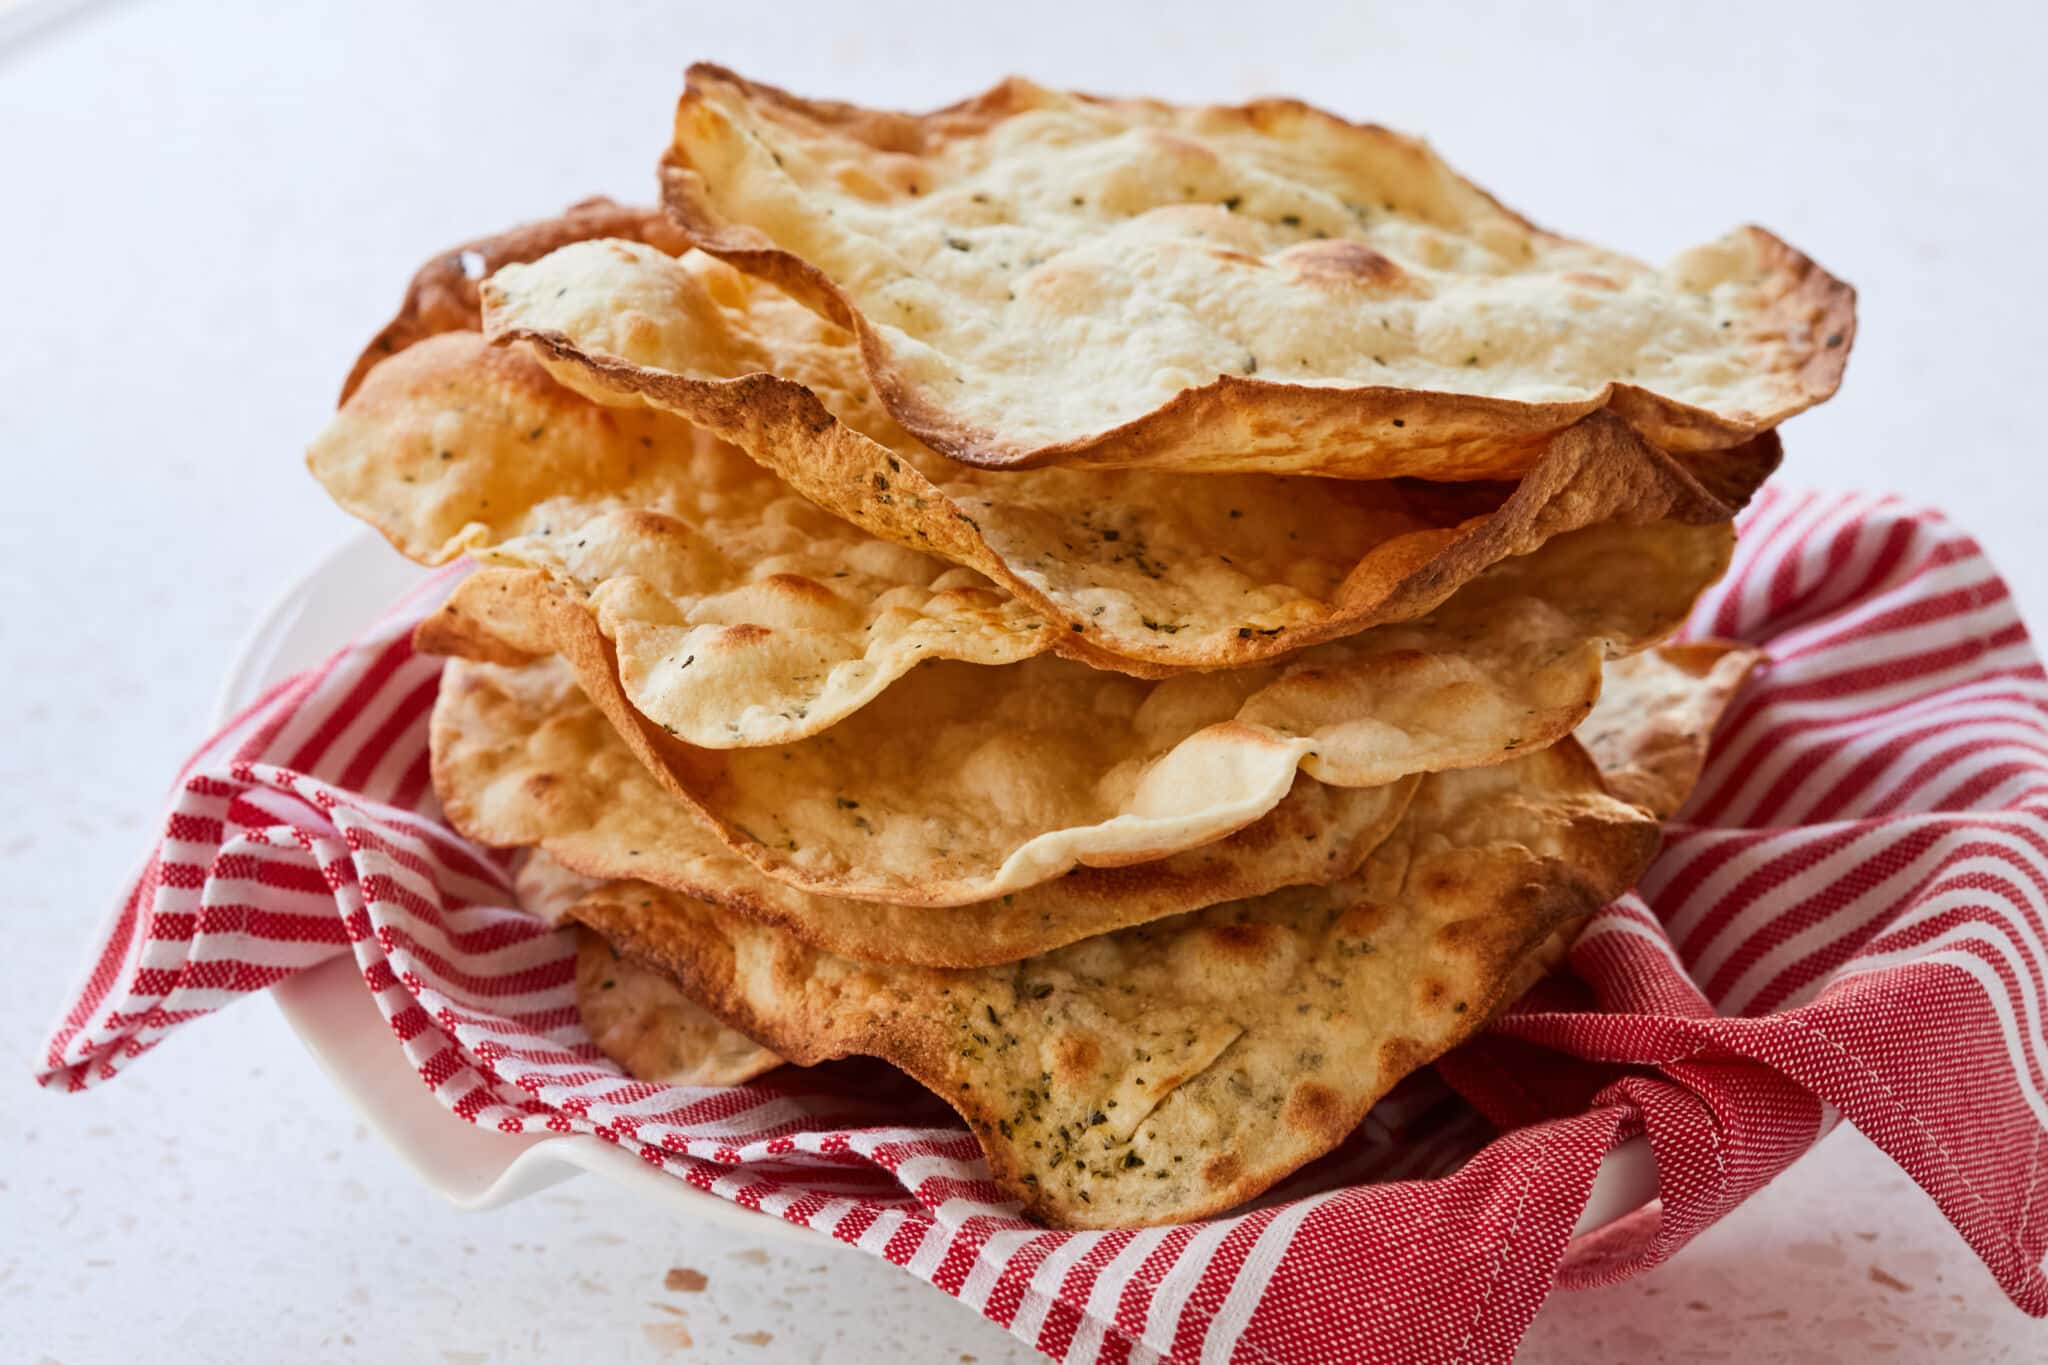 A stack of thin crispy Carta Di Musica is baked to golden brown perfection, sprinkled with flaky sea salt and herbs. Served on a white-red strip towel in a big white platter.